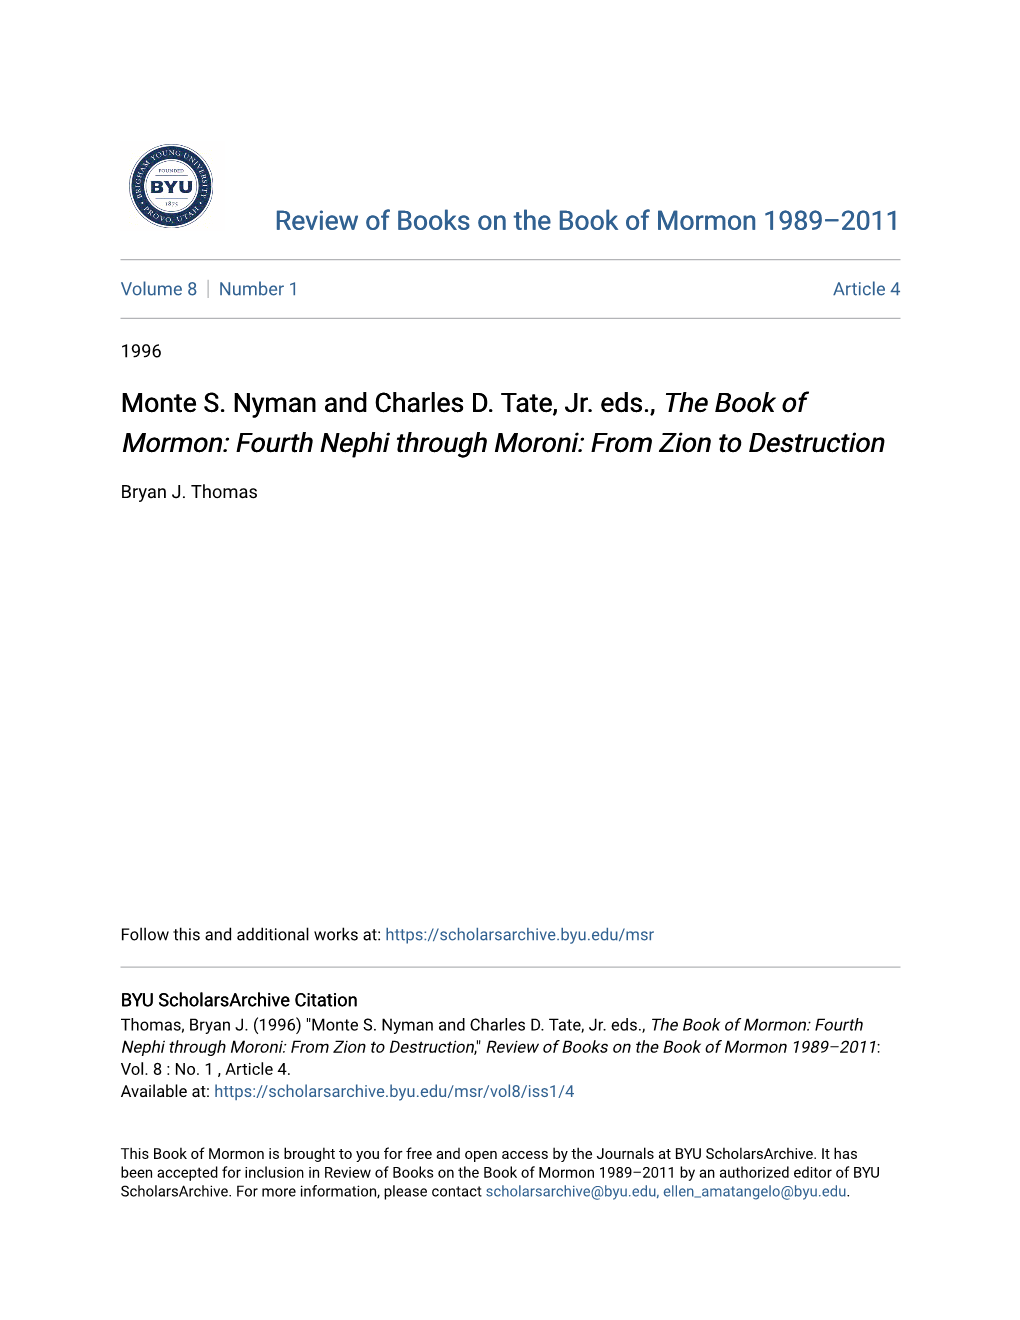 Monte S. Nyman and Charles D. Tate, Jr. Eds., the Book of Mormon: Fourth Nephi Through Moroni: from Zion to Destruction